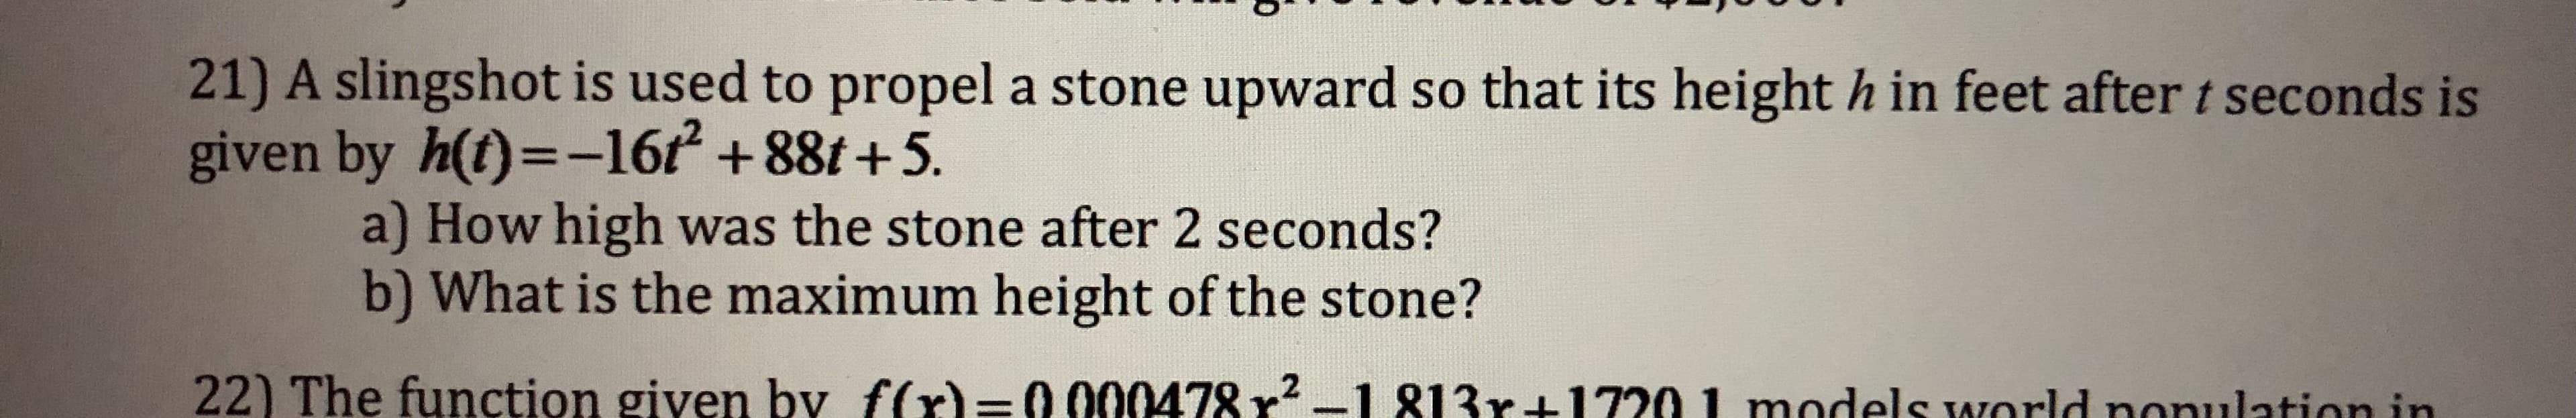 21) A slingshot is used to propel a stone upward so that its height h in feet after t seconds is
given by h(t)--162 +88t +5.
a) How high was the stone after 2 seconds?
b) What is the maximum height of the stone?
22) The function given by f(x)=0 000478 r2-1 813r+1720 I models world nonulat
